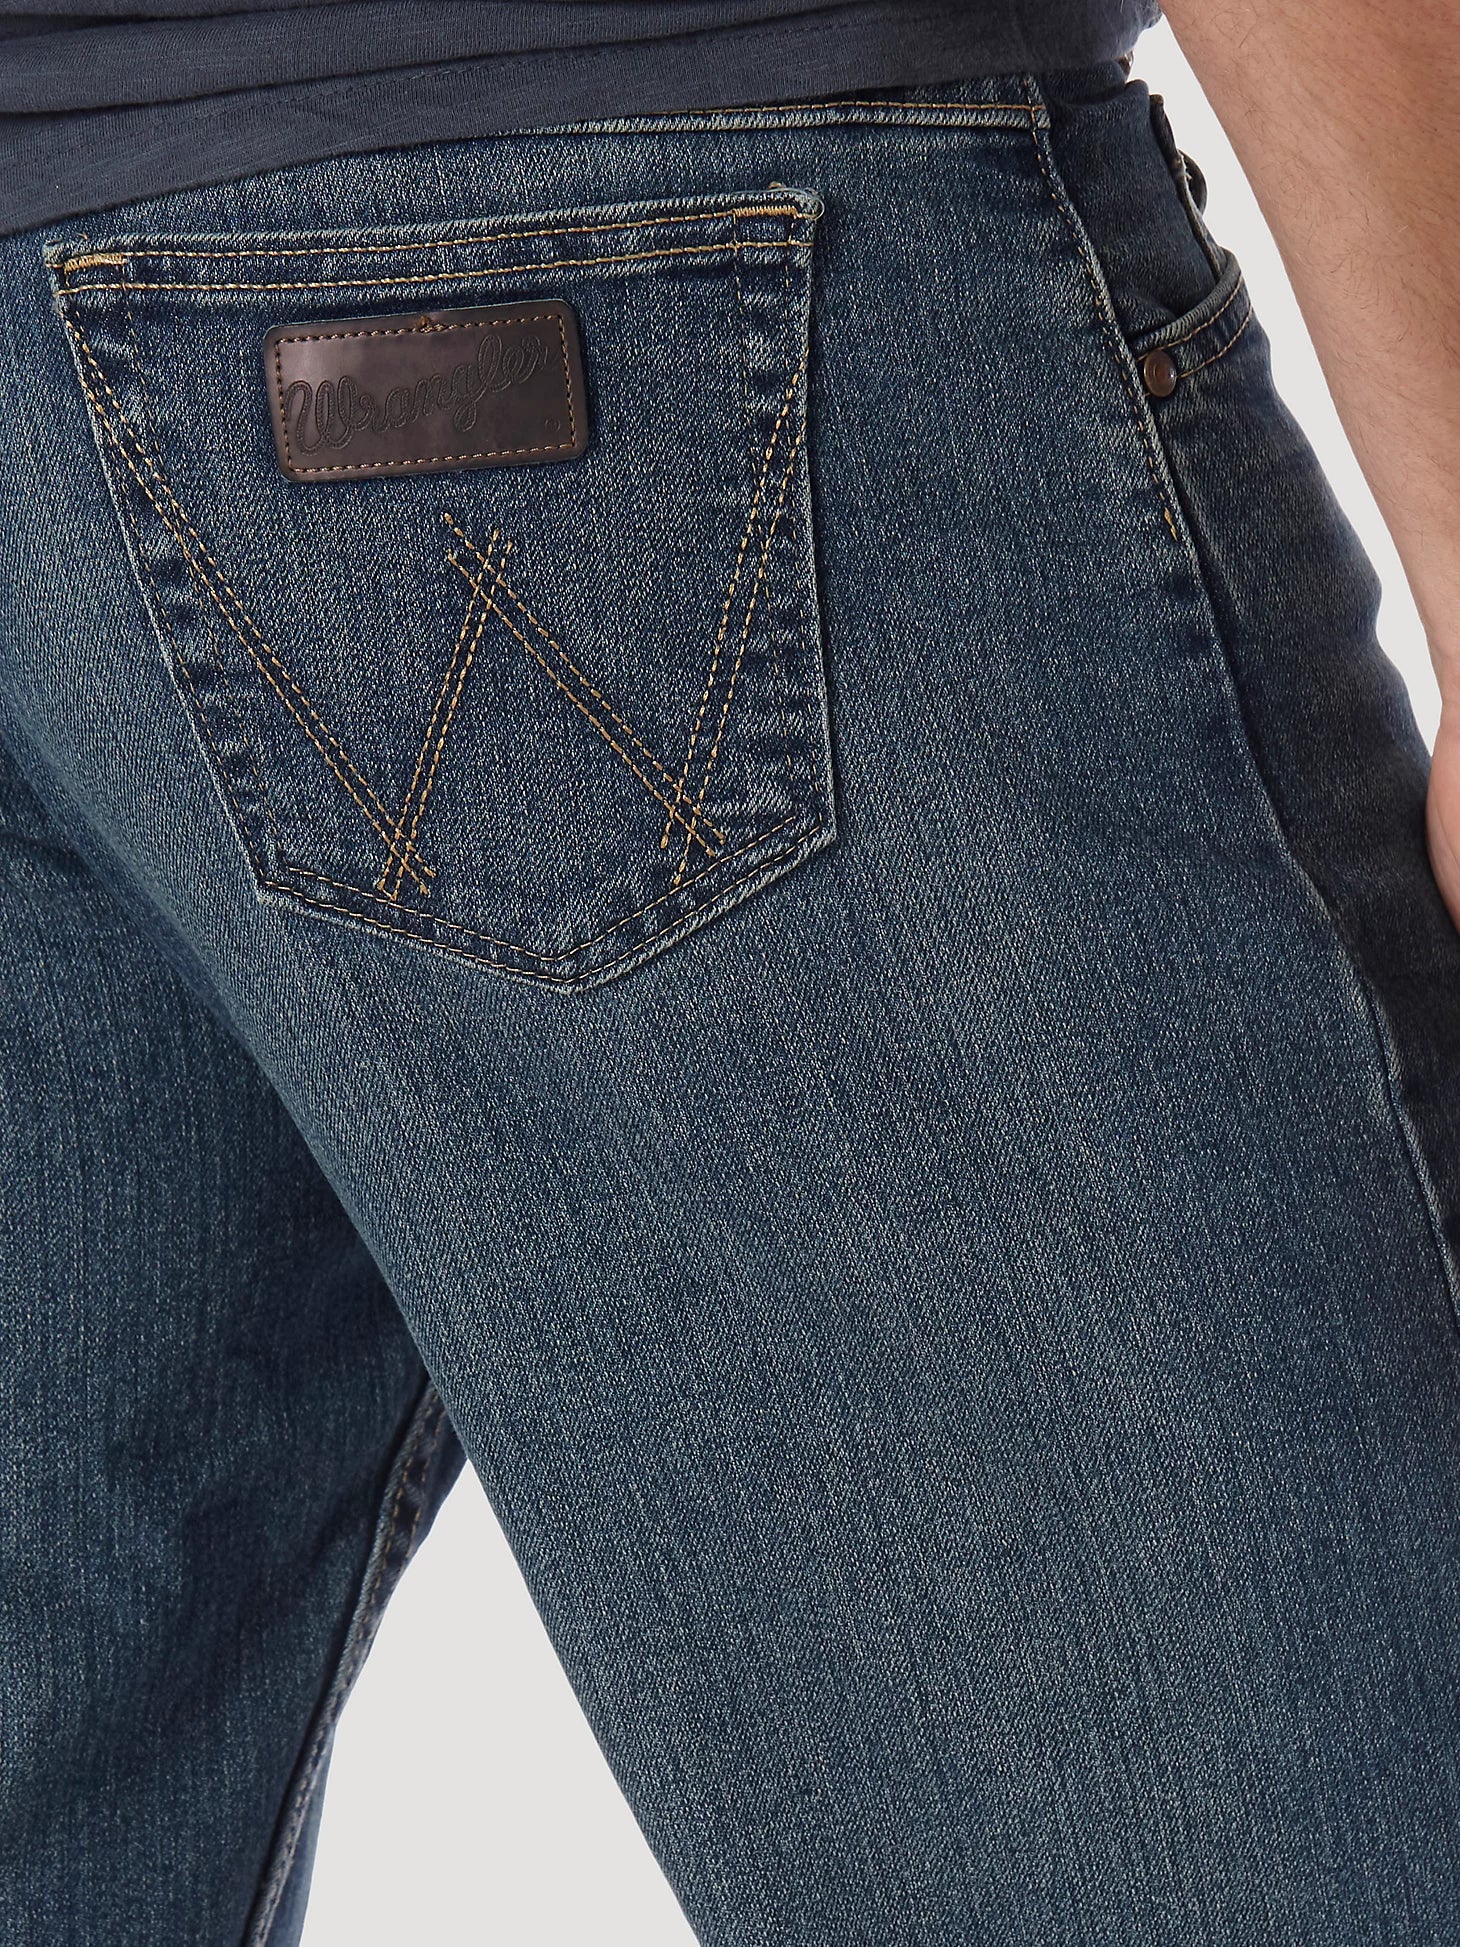 WRANGLER® 20X® ADVANCED COMFORT 01 COMPETITION RELAXED JEAN IN BARREL